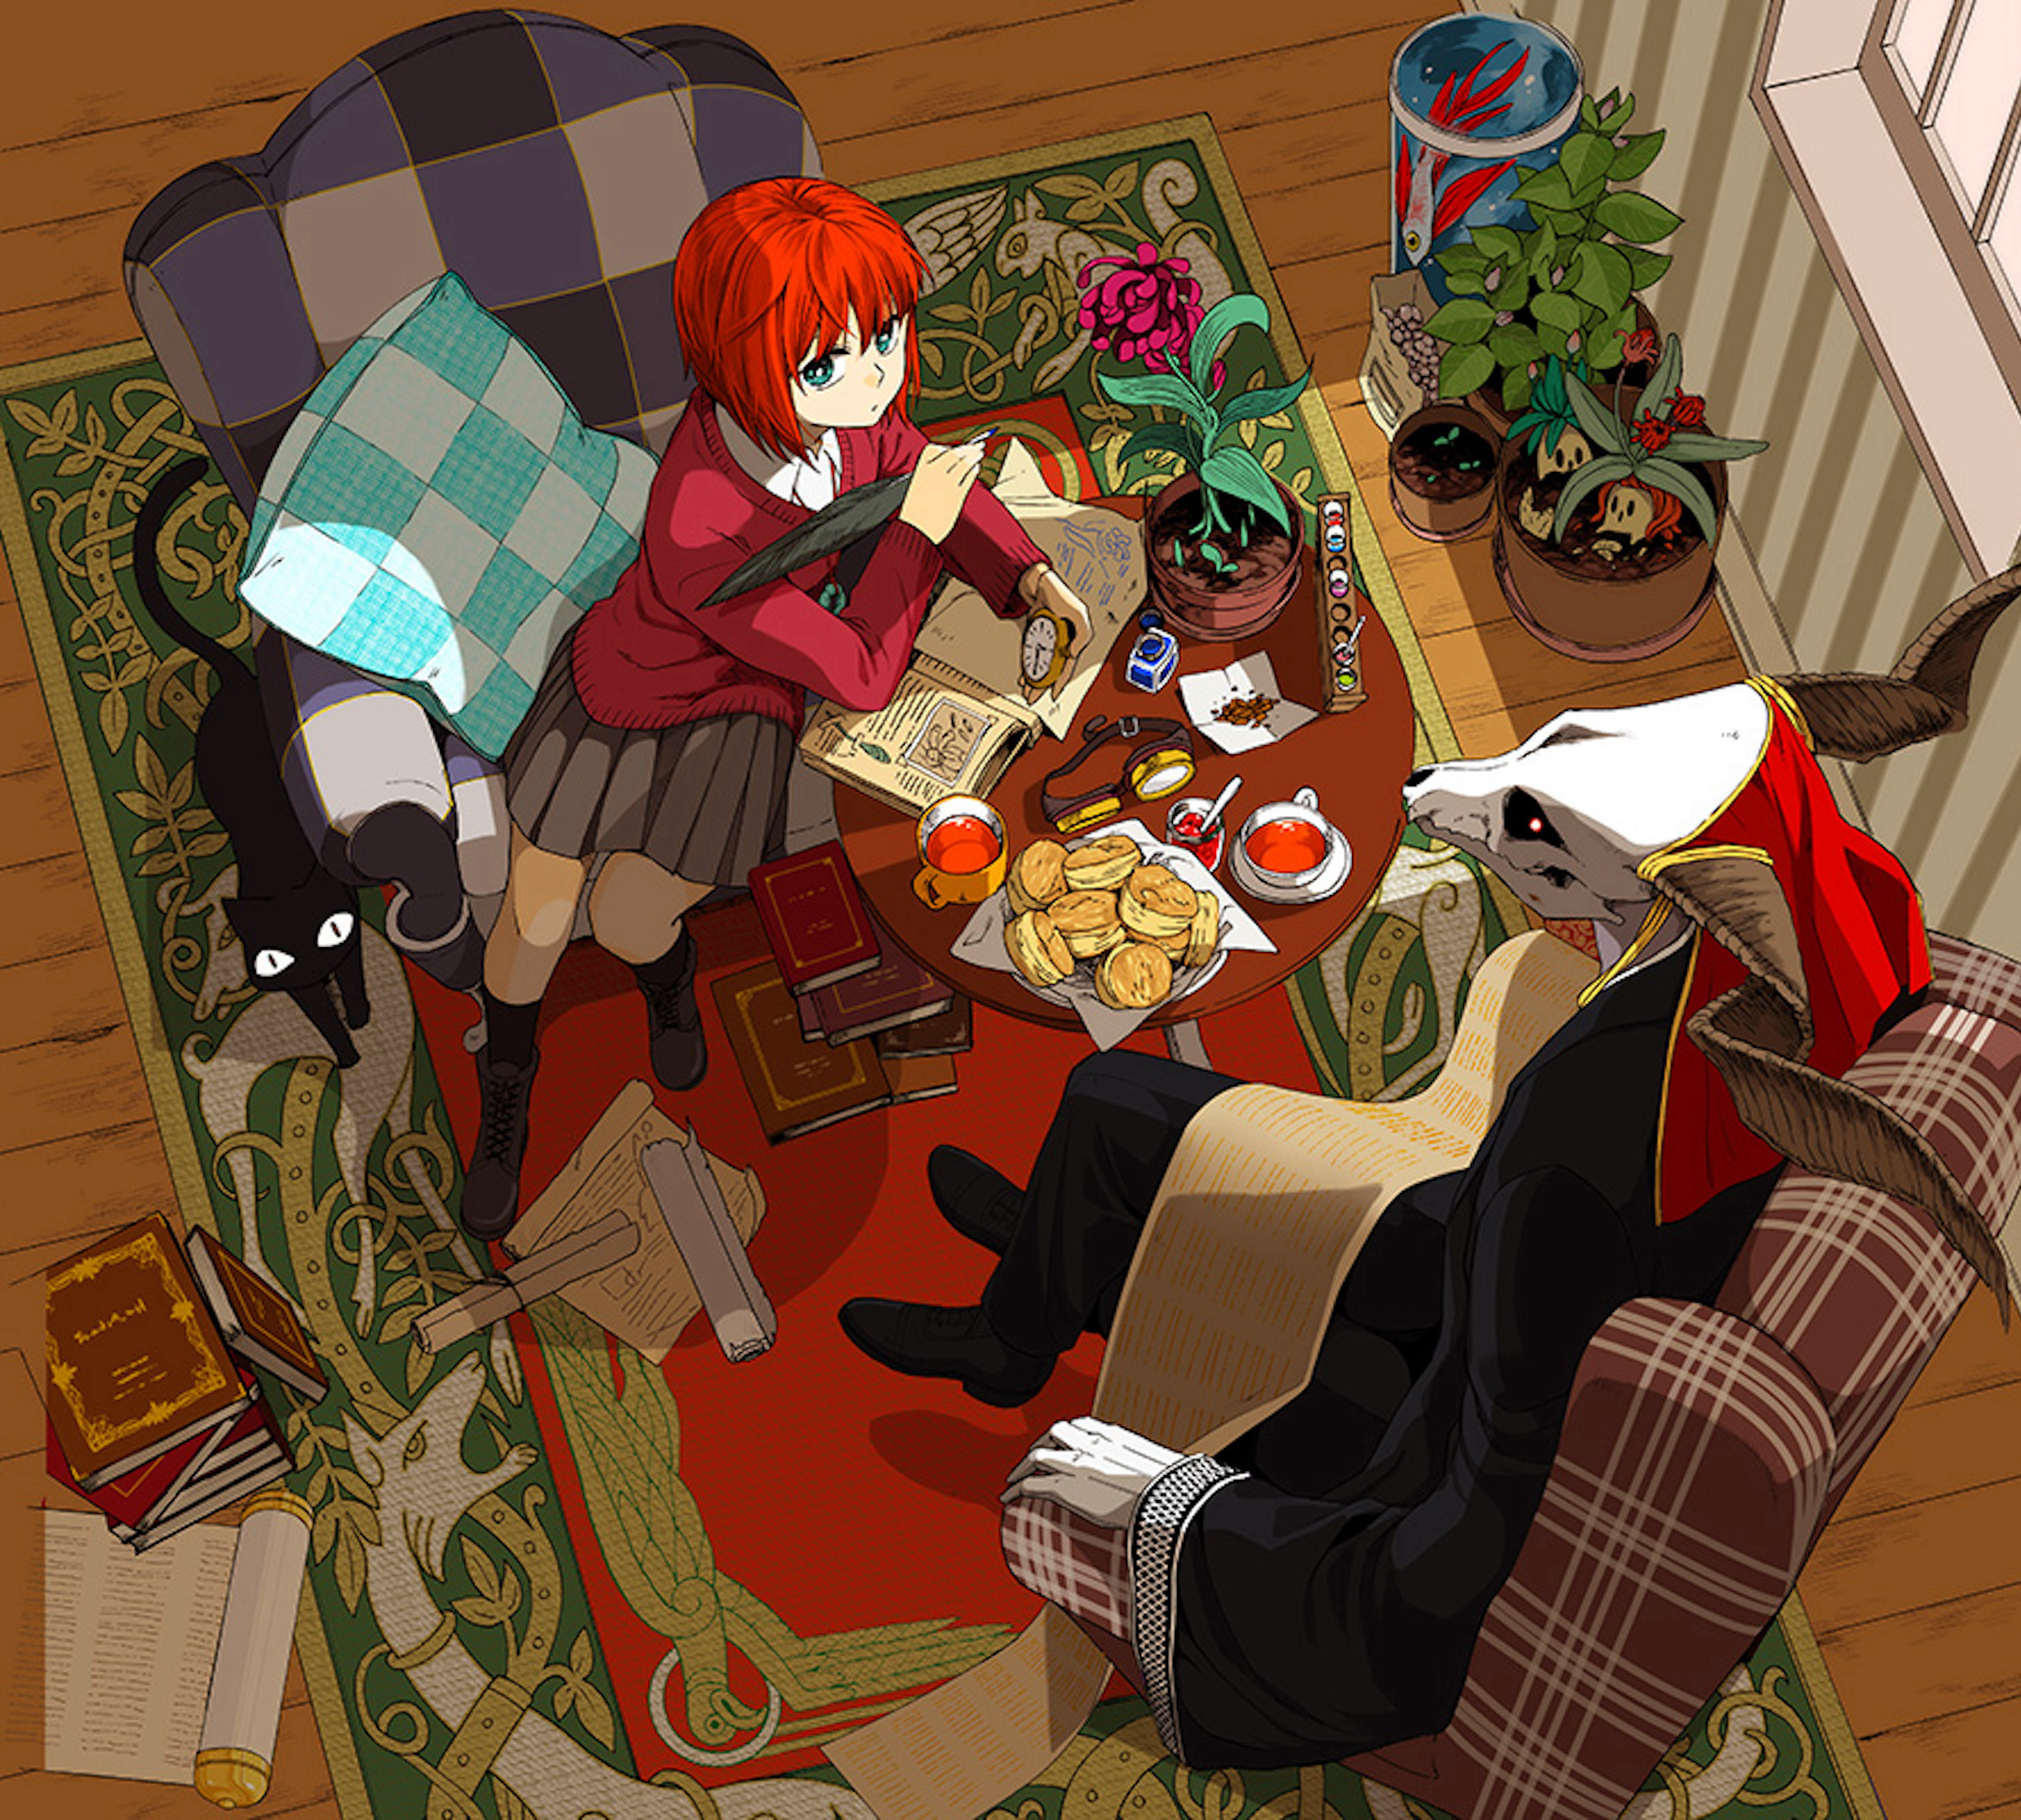 The Ancient Magus Bride, Wiki